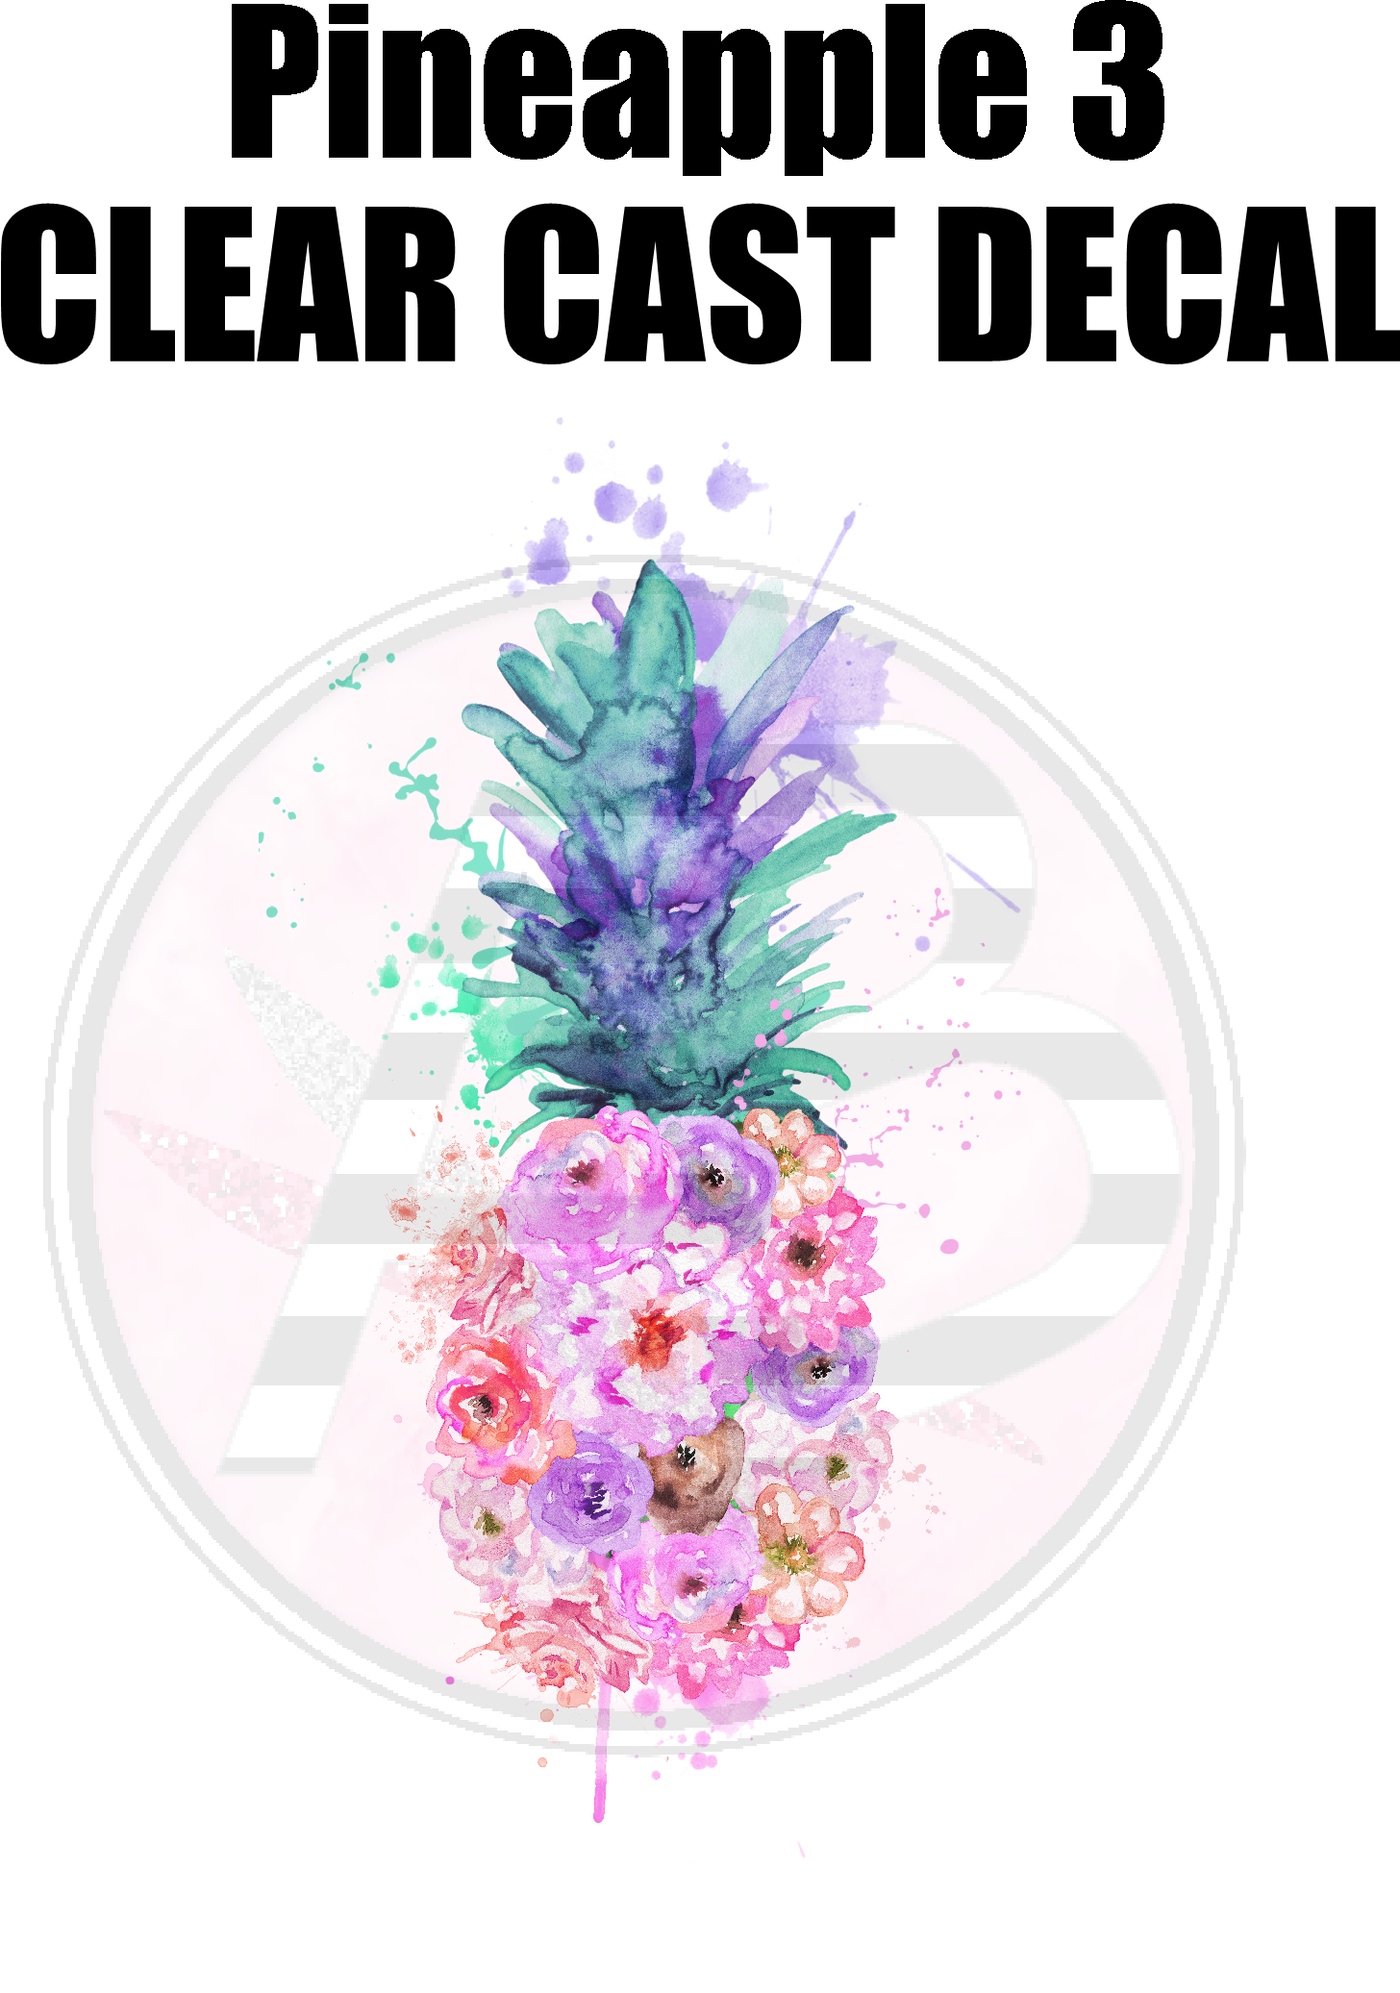 Pineapple 3 - Clear Cast Decal